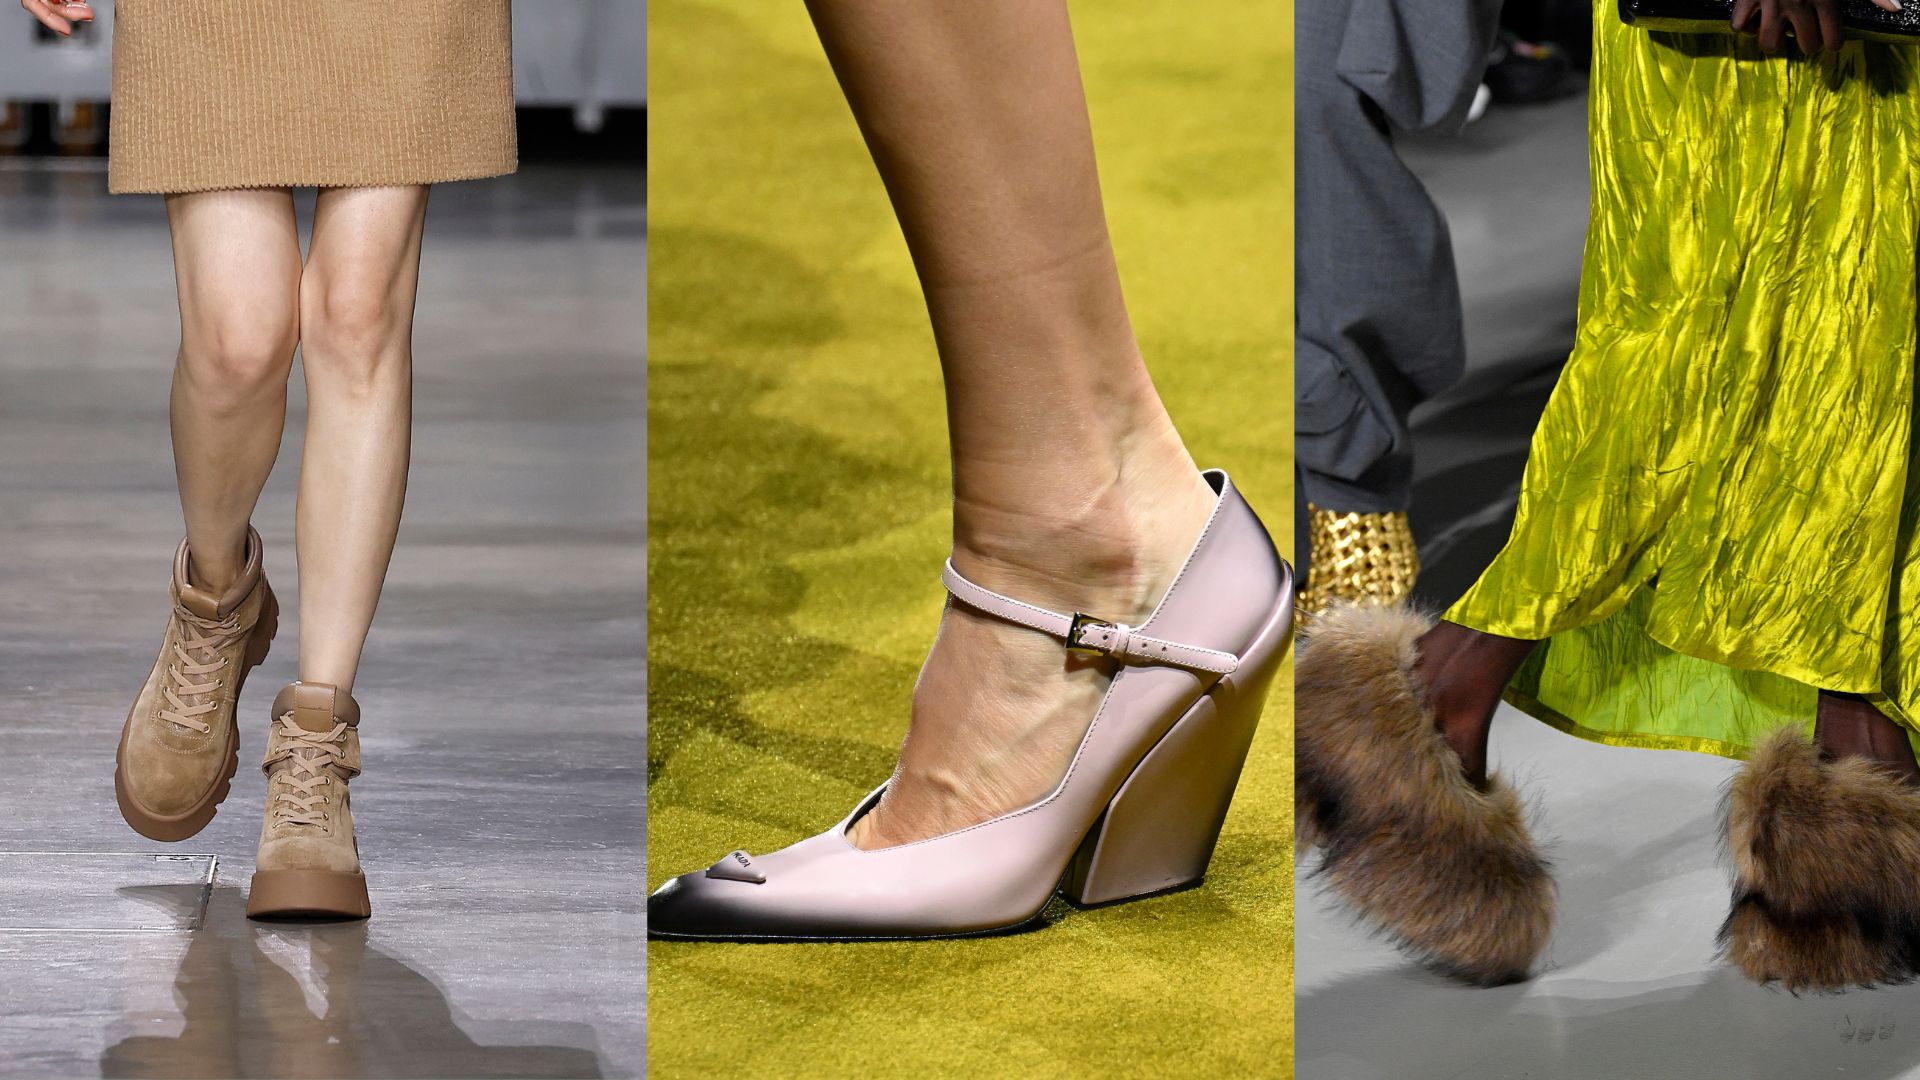 Low-Heeled Shoes, the Triumph of Fashion Frump - The New York Times